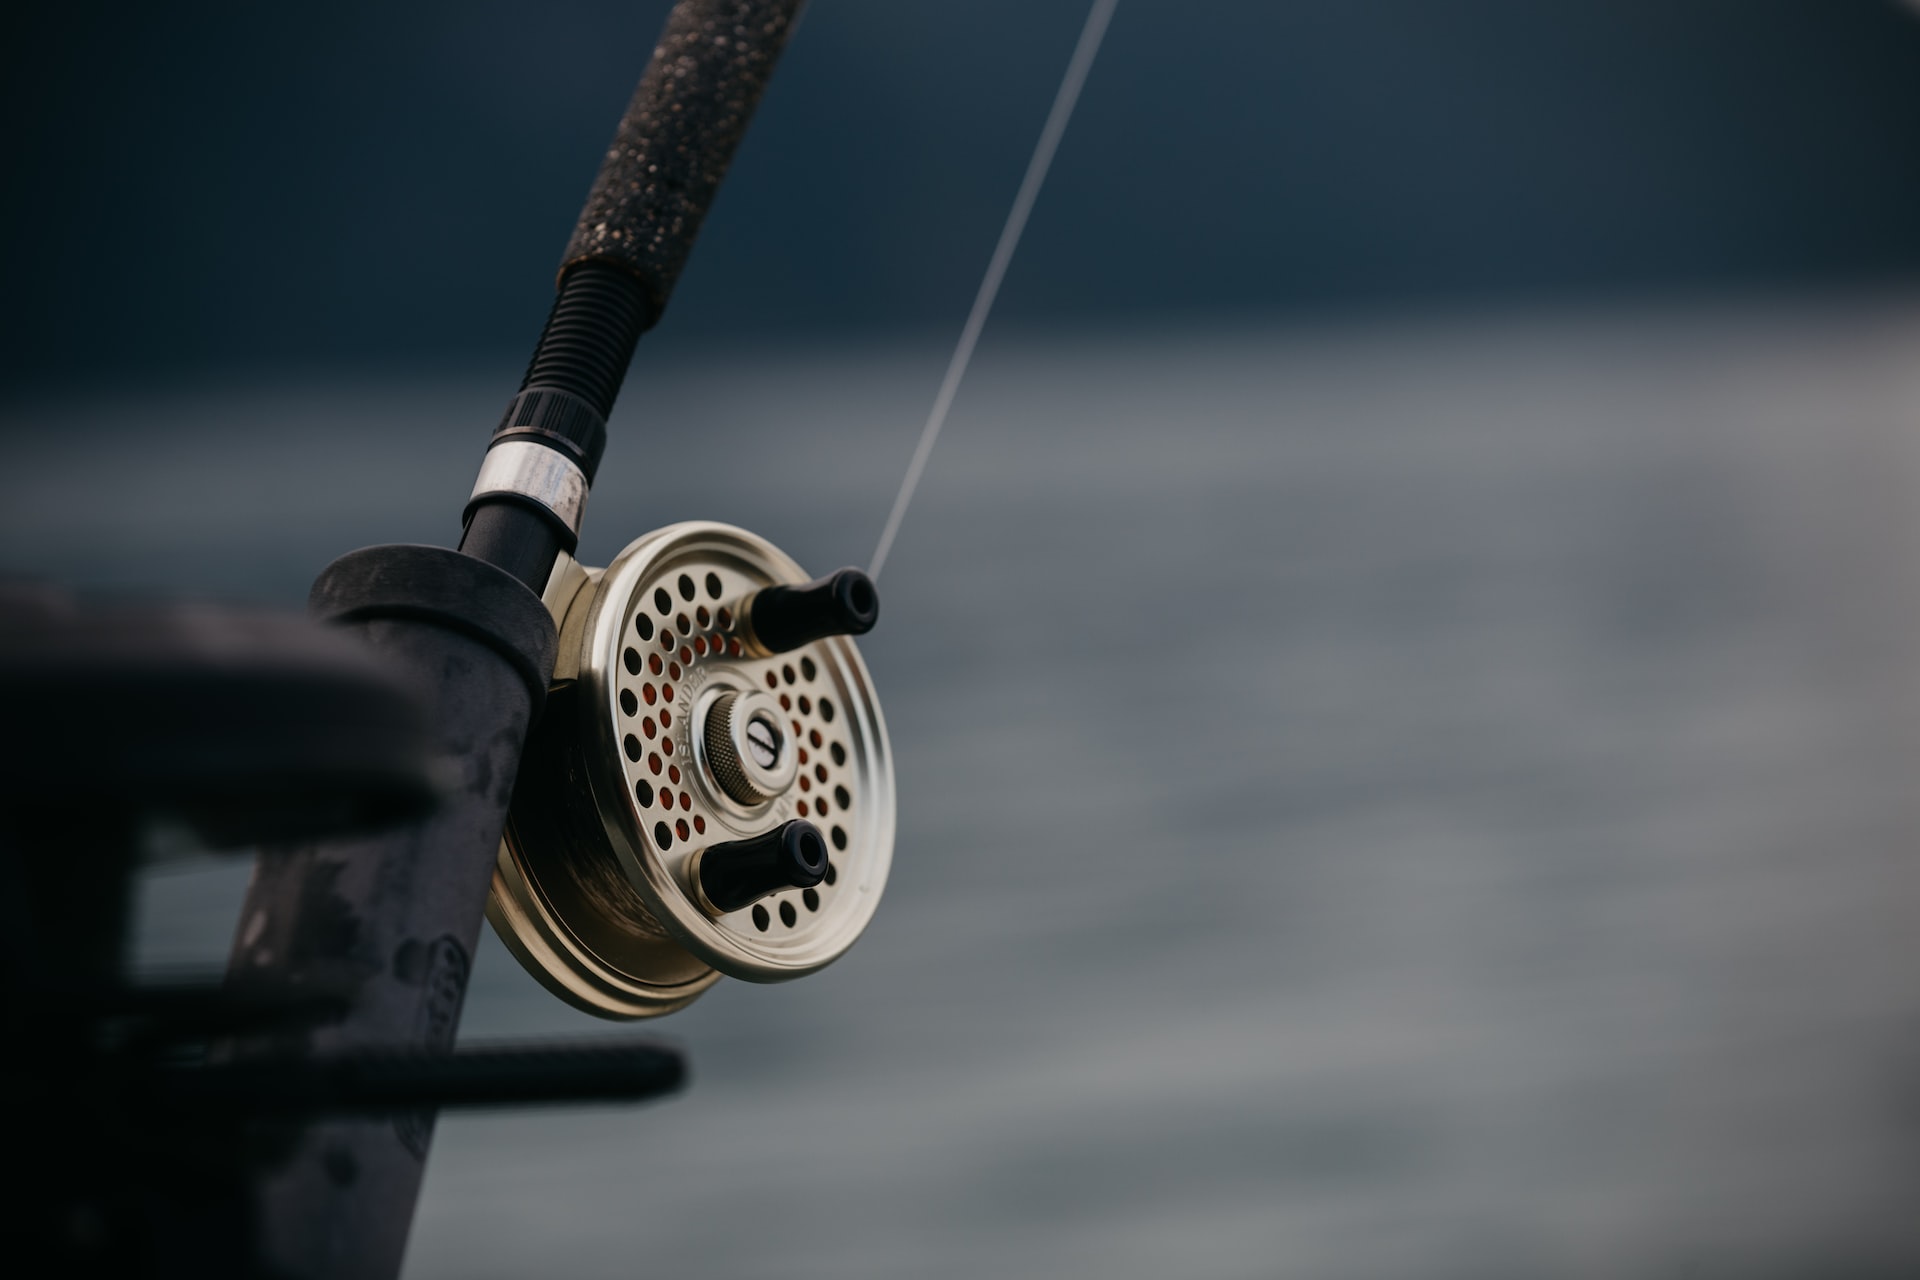 Fishing rod with reel close-up